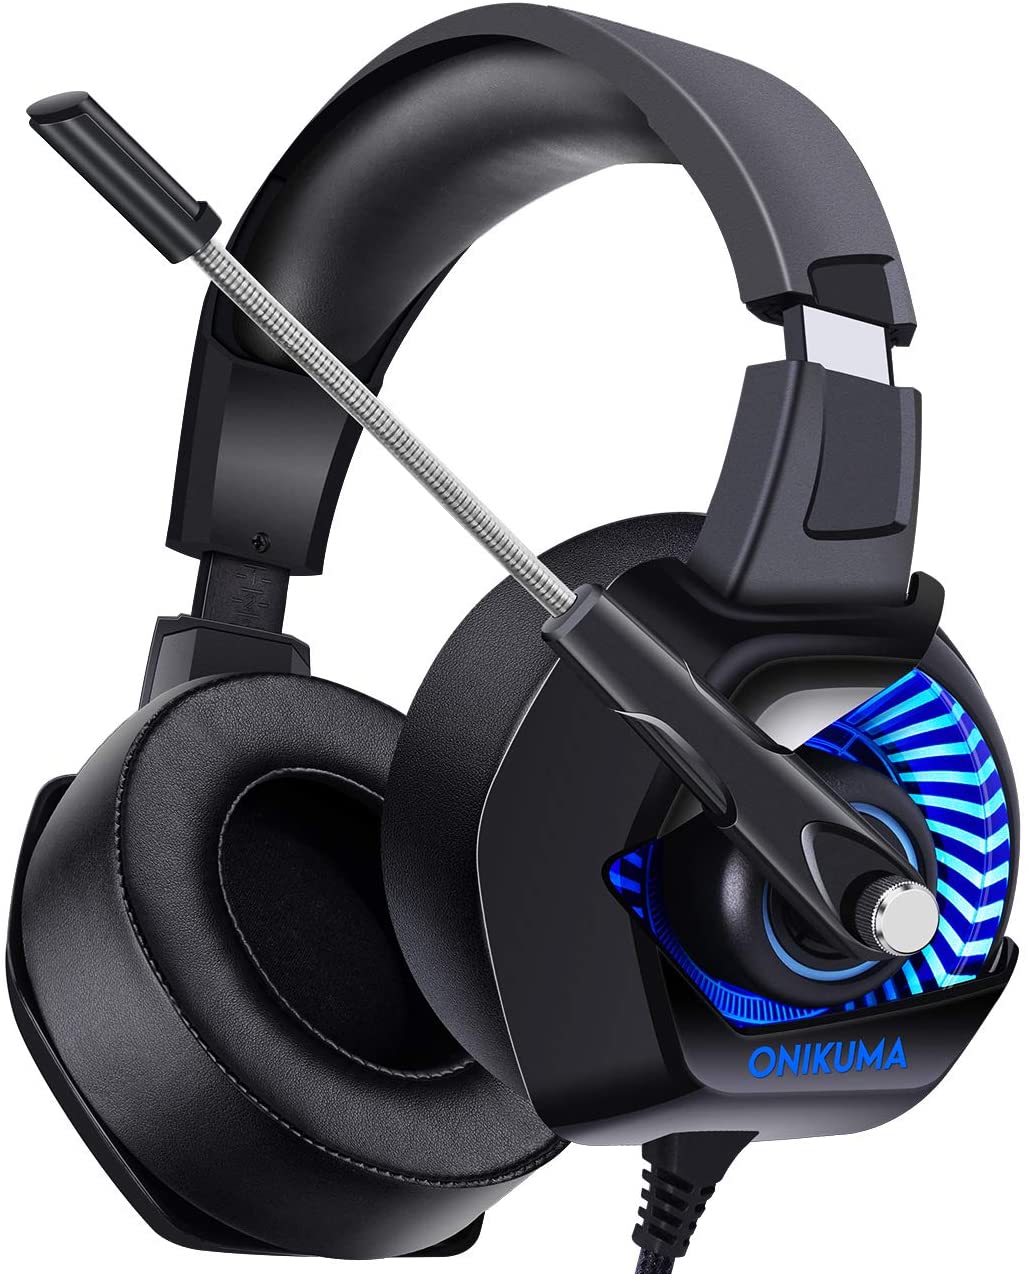 ONIKUMA II Gaming Headset for PS4, PC, Xbox One, Stereo Headphones for Laptop, Mac, Nintendo Switch with 7.1 Surround Sound, LED Lights, Noise Cancelling Mic, Breathing Ear Pads, Volume Control -Black